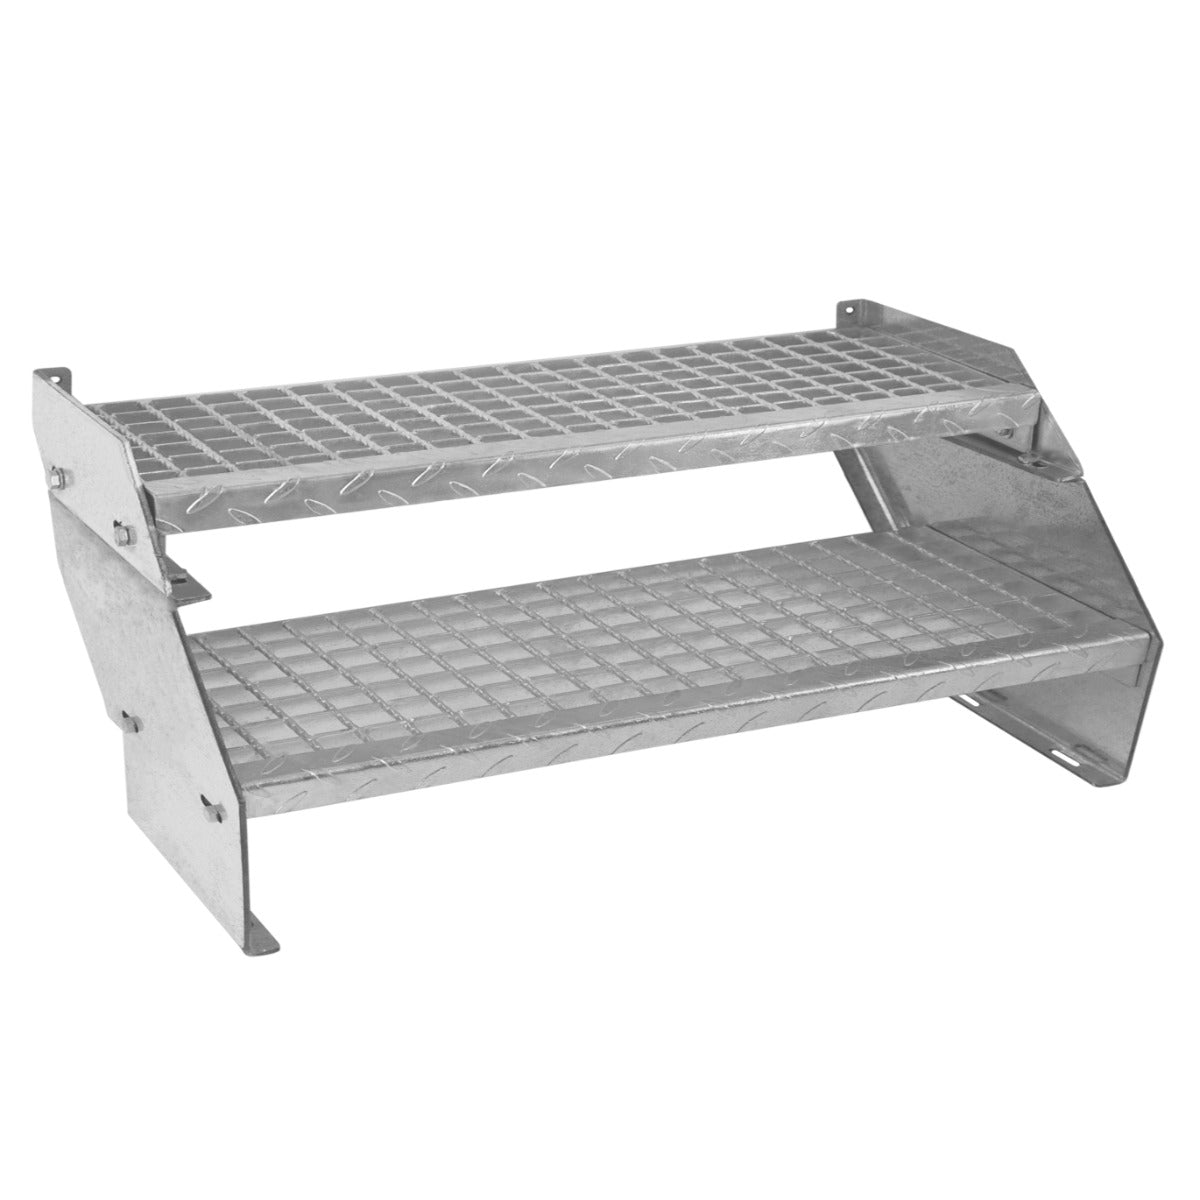 Adjustable 2 Section Galvanised Staircase - 900mm Wide